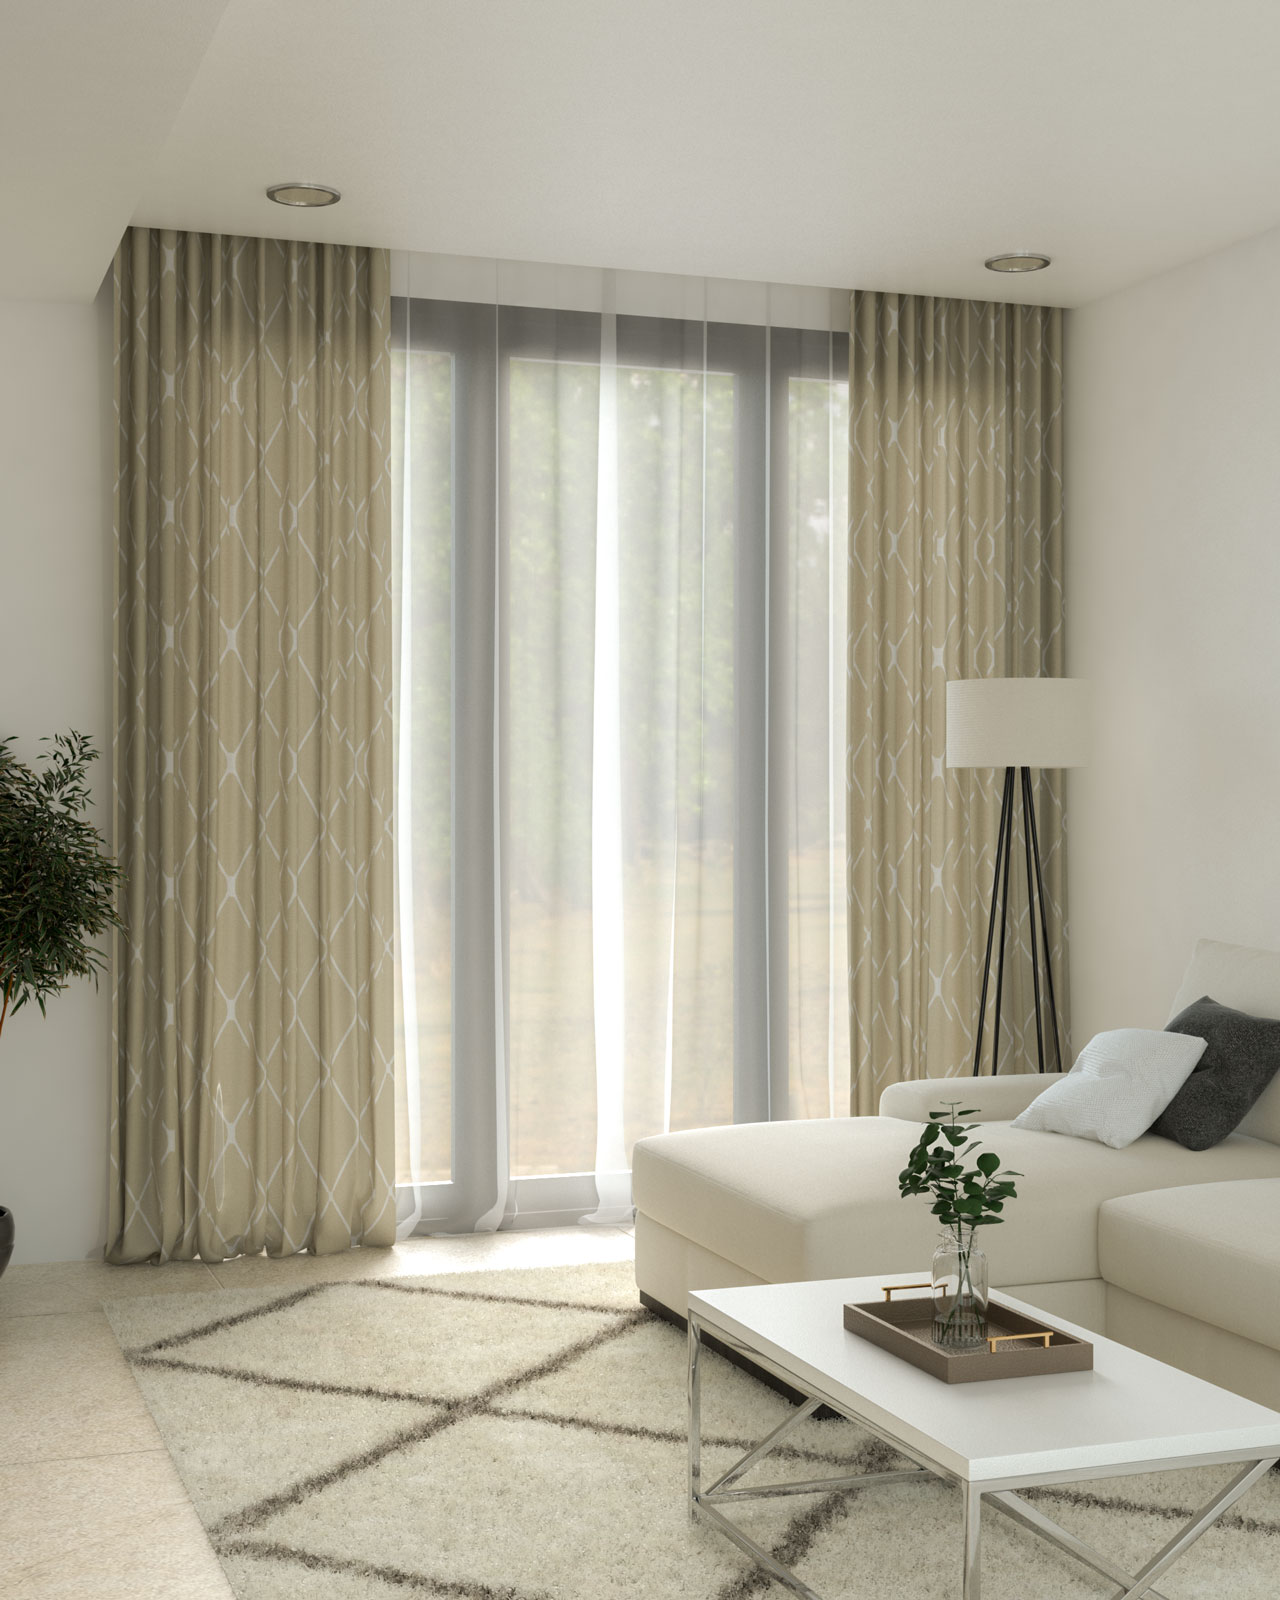 White walls with beige and white curtains